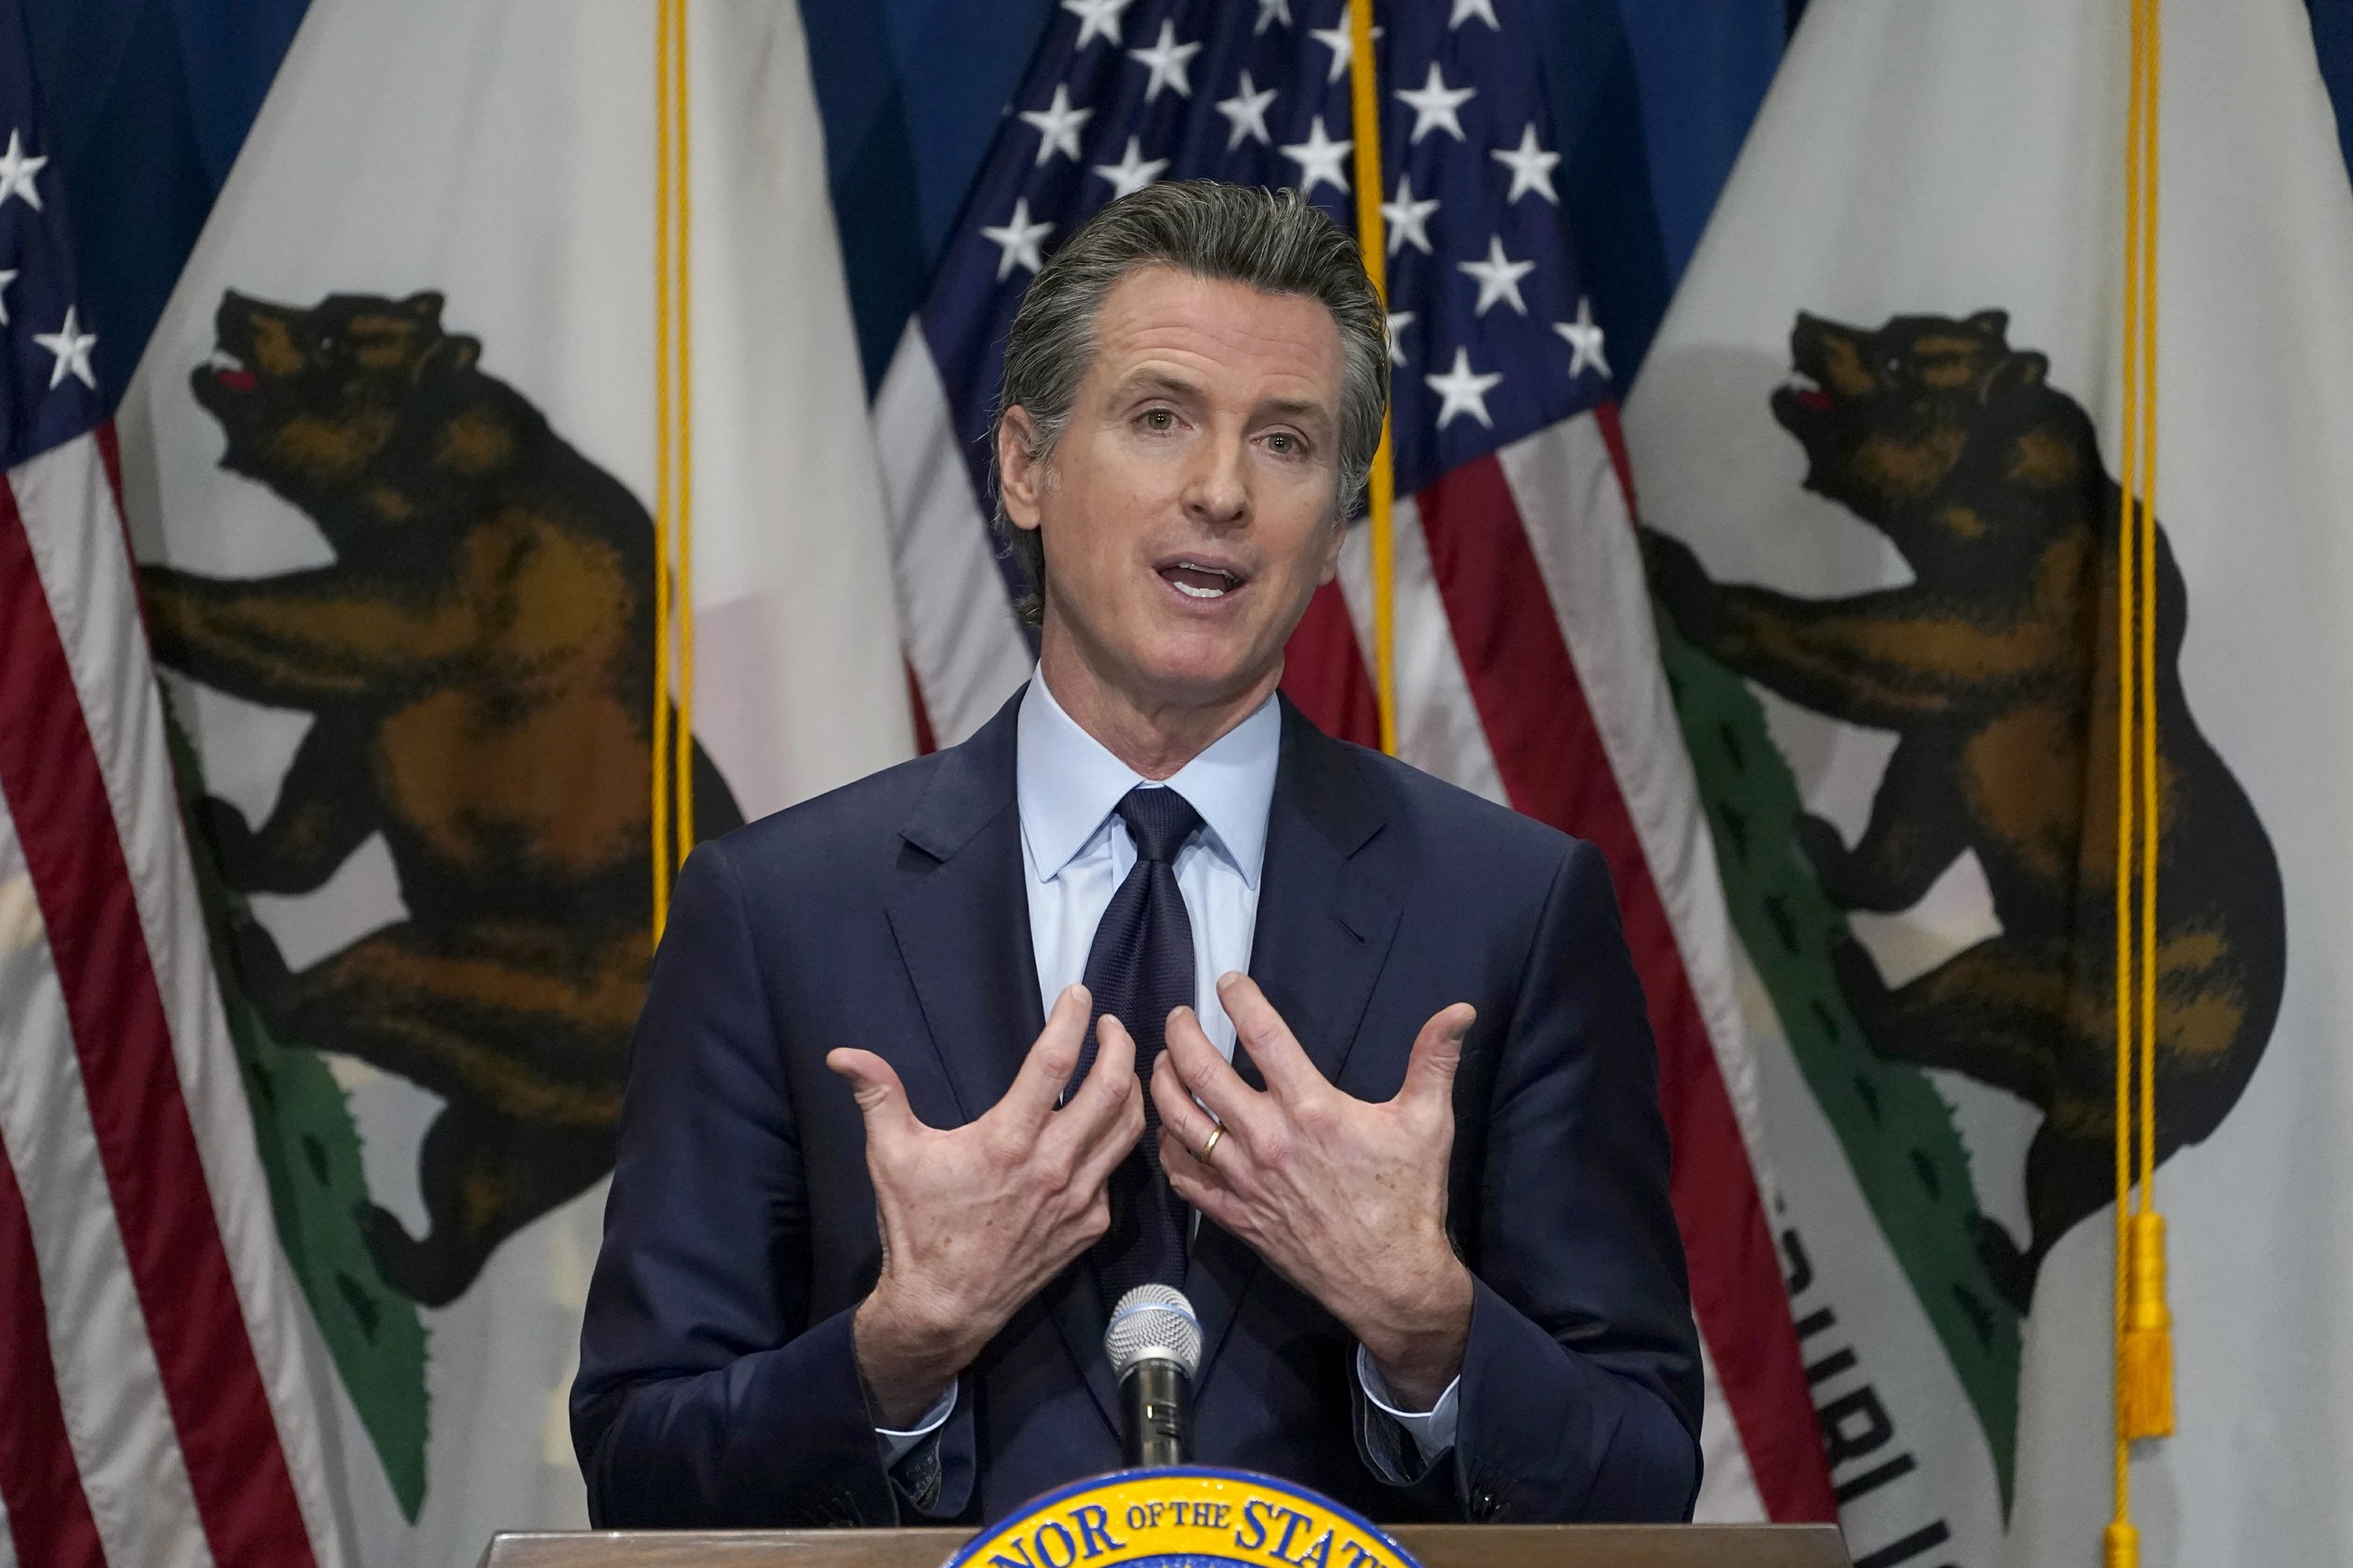 California Democrats See Reaction After Recall “Coup” Claims